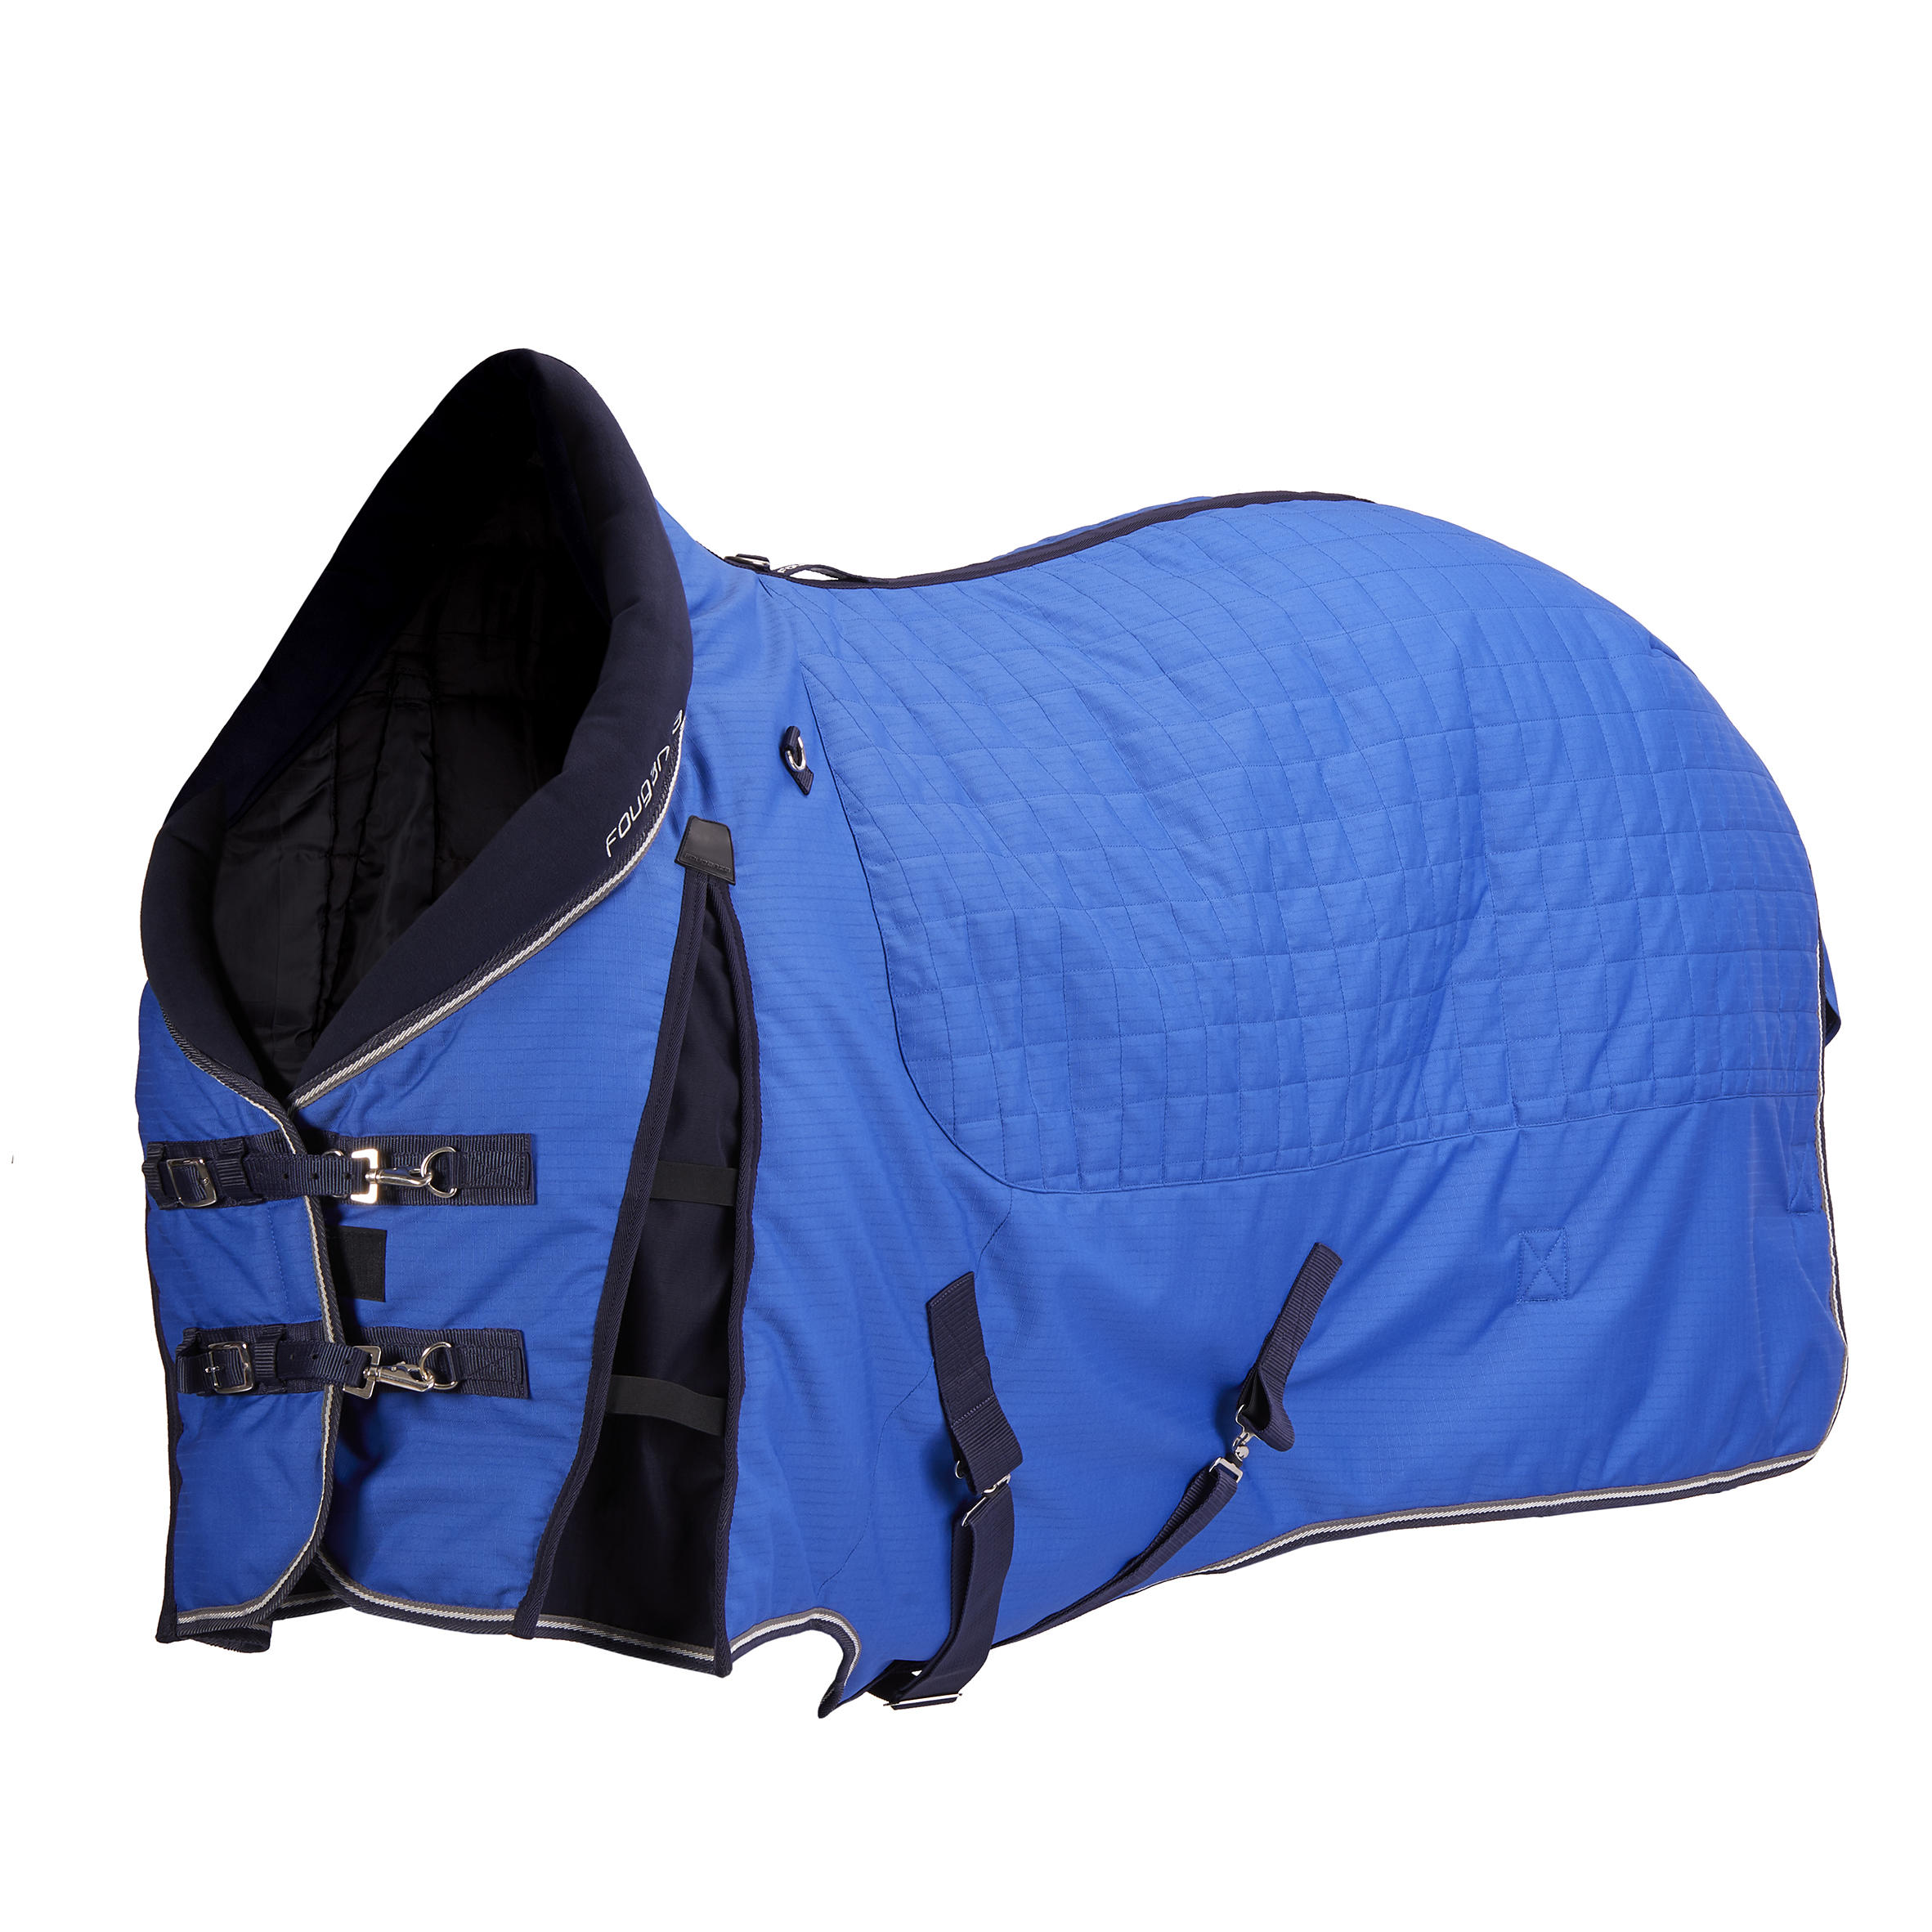 Horse Riding Stable Rug 400 For Horse And Pony - Royal Blue 1/9